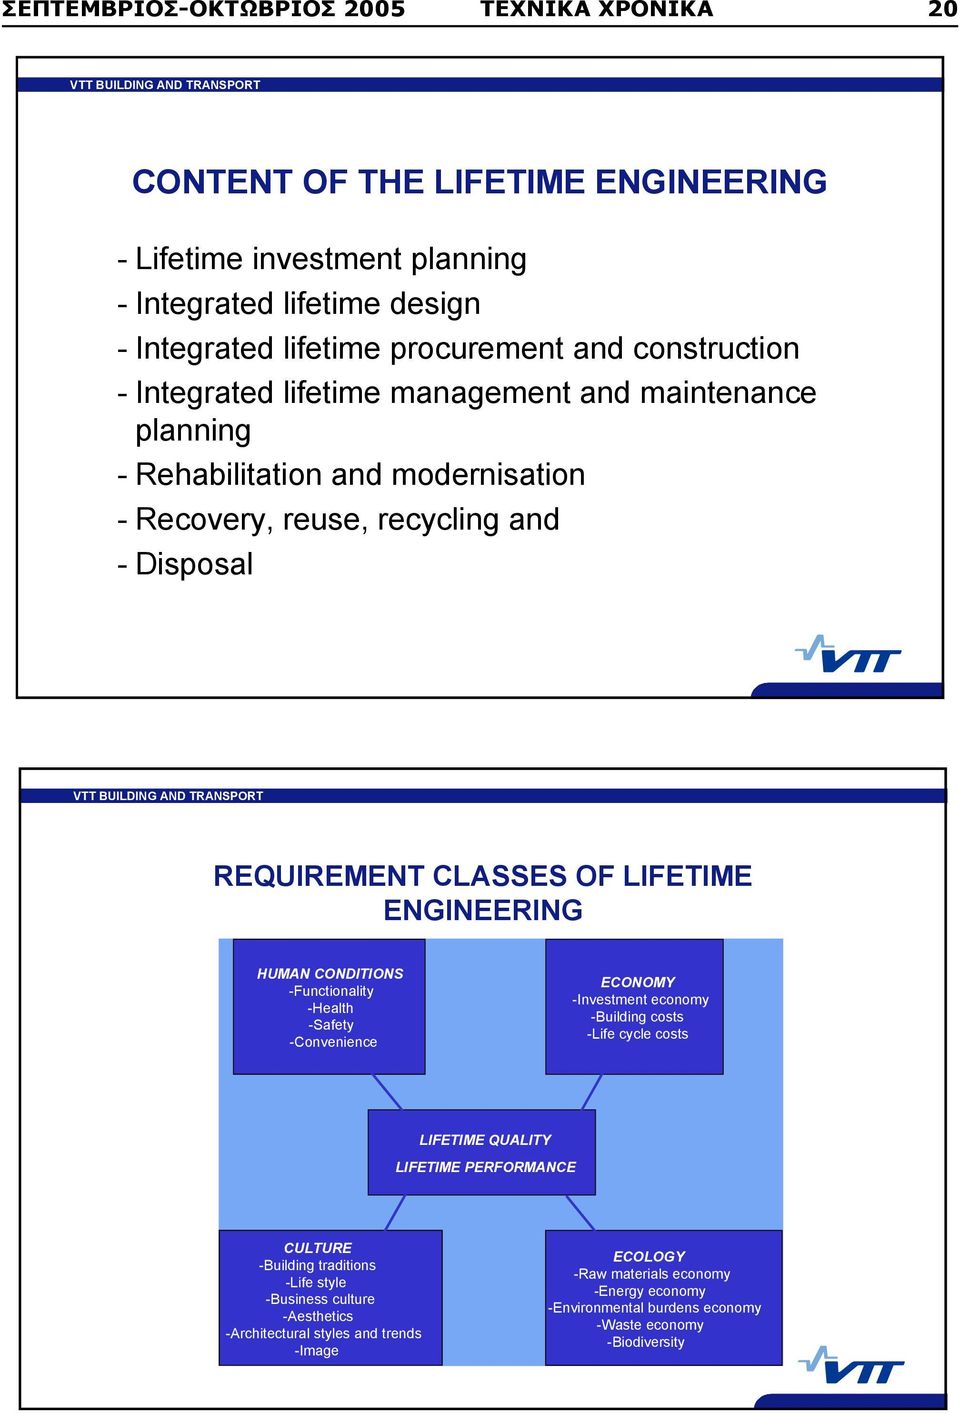 REQUIREMENT CLASSES OF LIFETIME ENGINEERING HUMAN CONDITIONS -Functionality -Health -Safety -Convenience ECONOMY -Investment economy -Building costs -Life cycle costs LIFETIME QUALITY LIFETIME